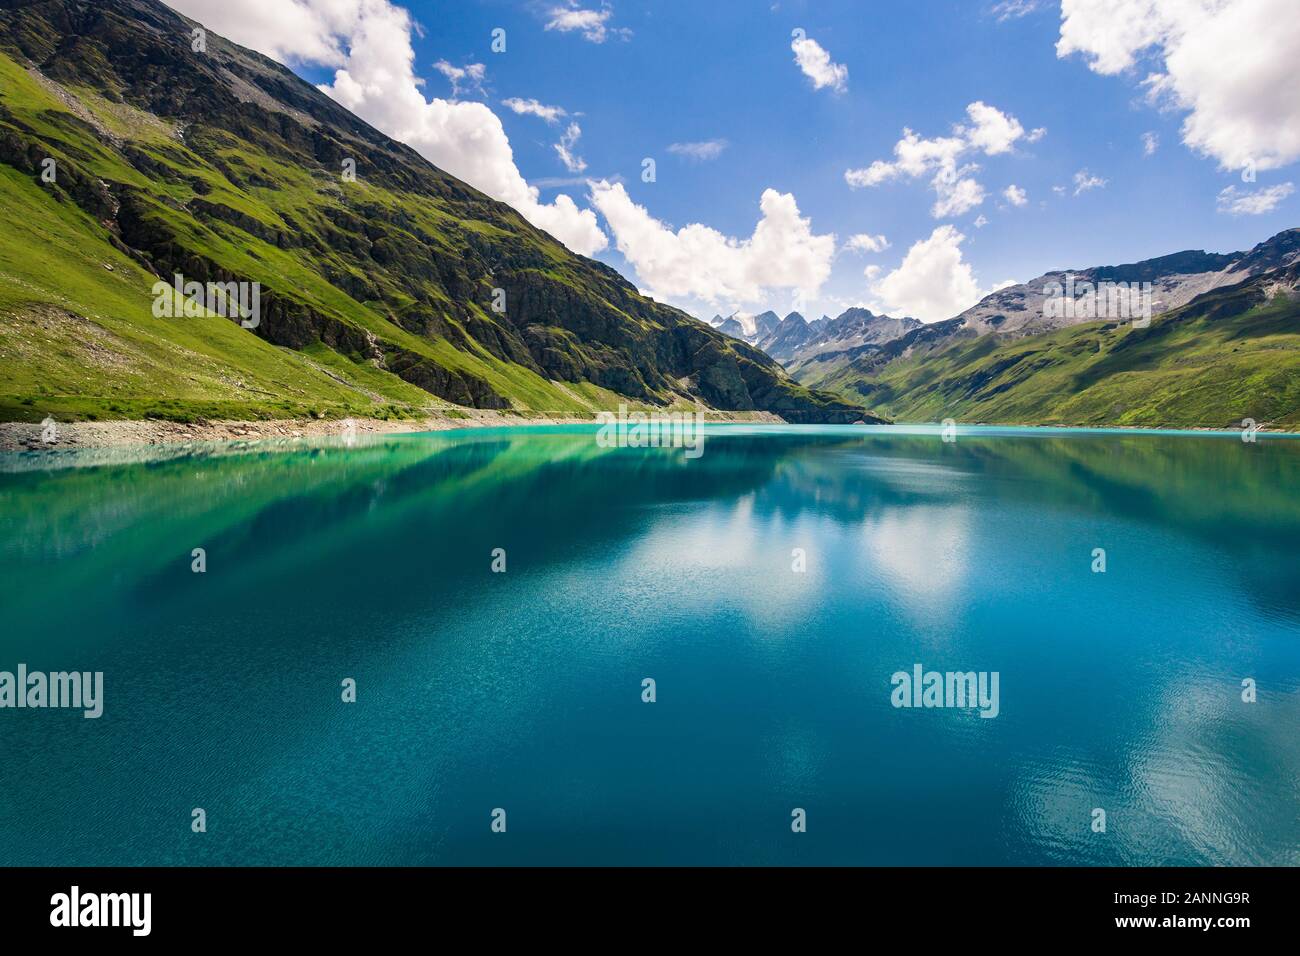 Mountains reflect in the clear blue water of the mountain lake Lac de Moiry in the Pennine Alps on a summer day with a nice blue sky and some white cl Stock Photo